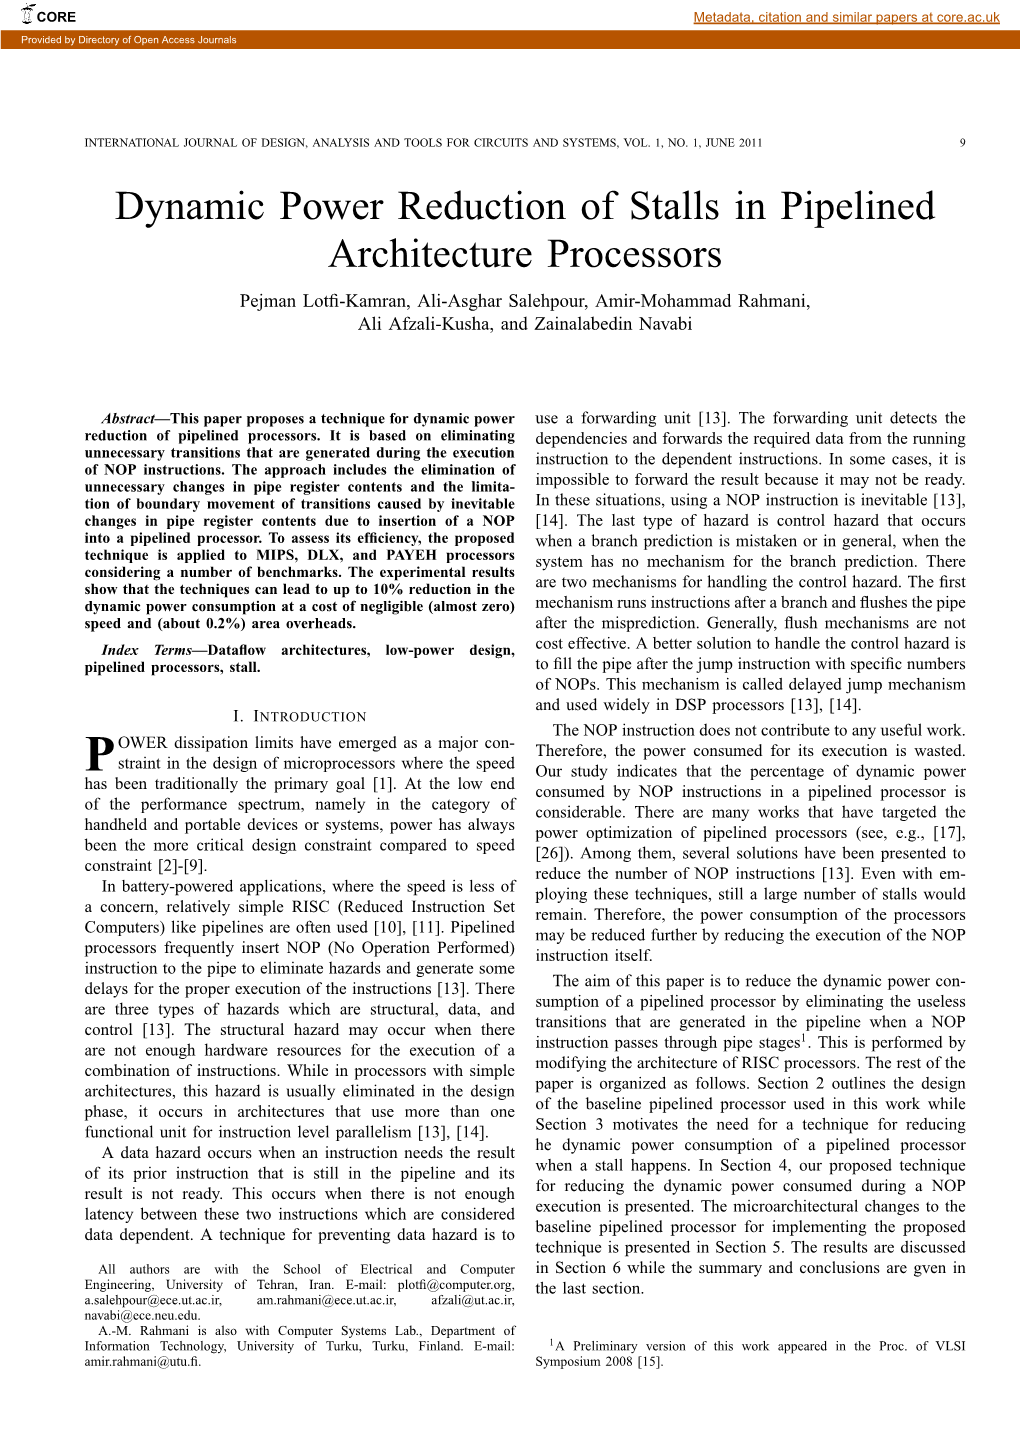 Dynamic Power Reduction of Stalls in Pipelined Architecture Processors